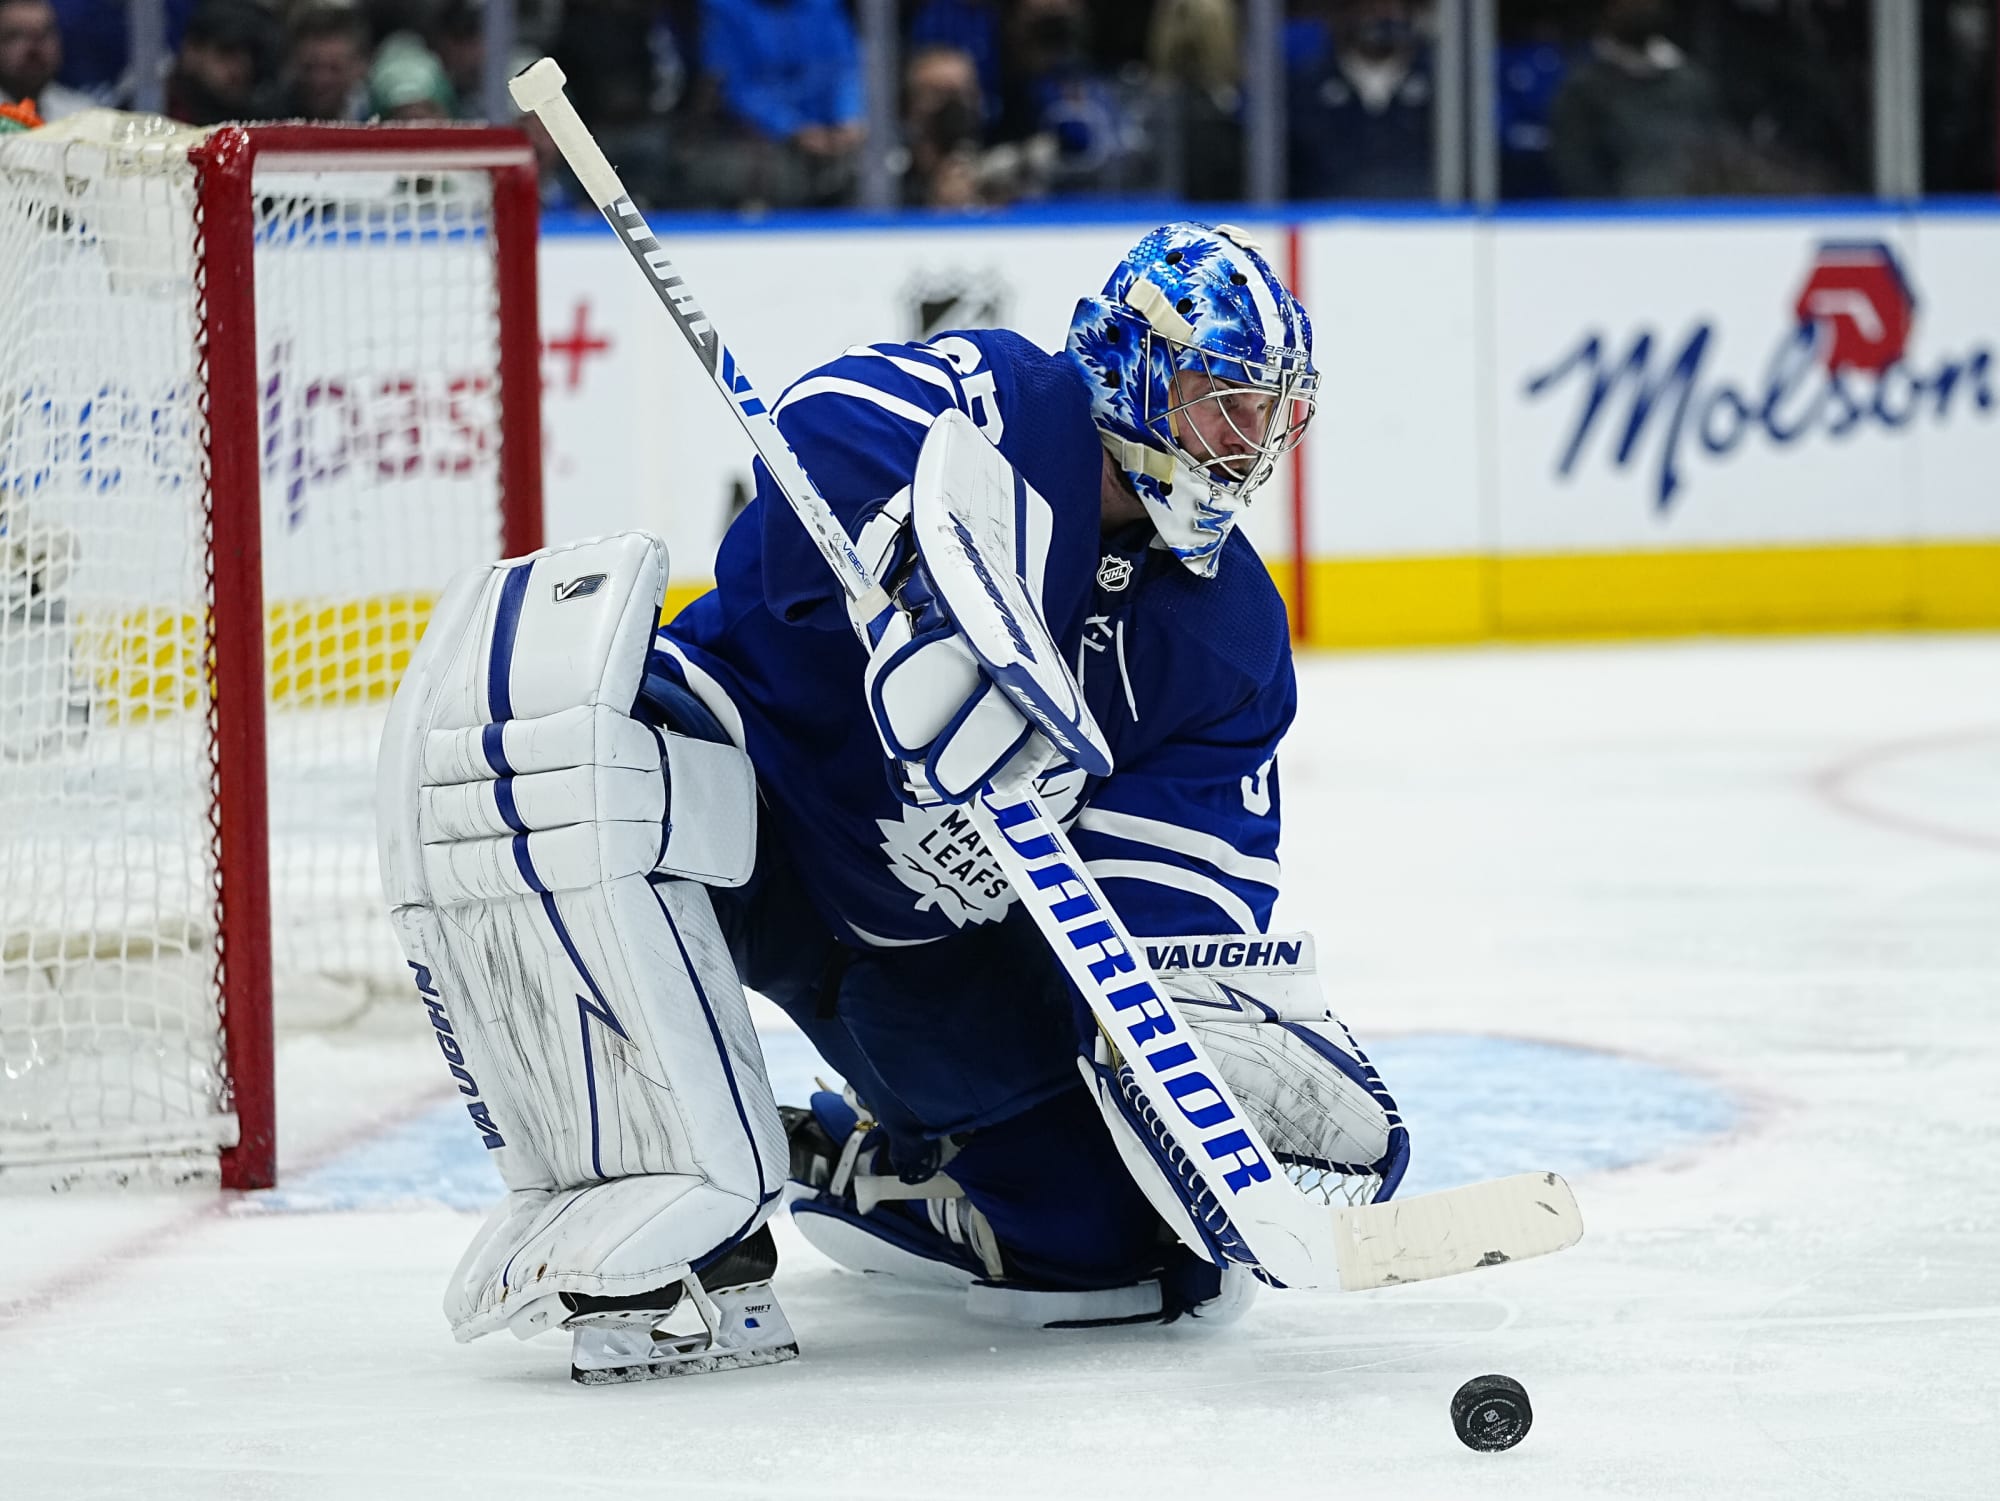 Jack Campbell’s injury further complicates Maple Leafs’ goalie situation